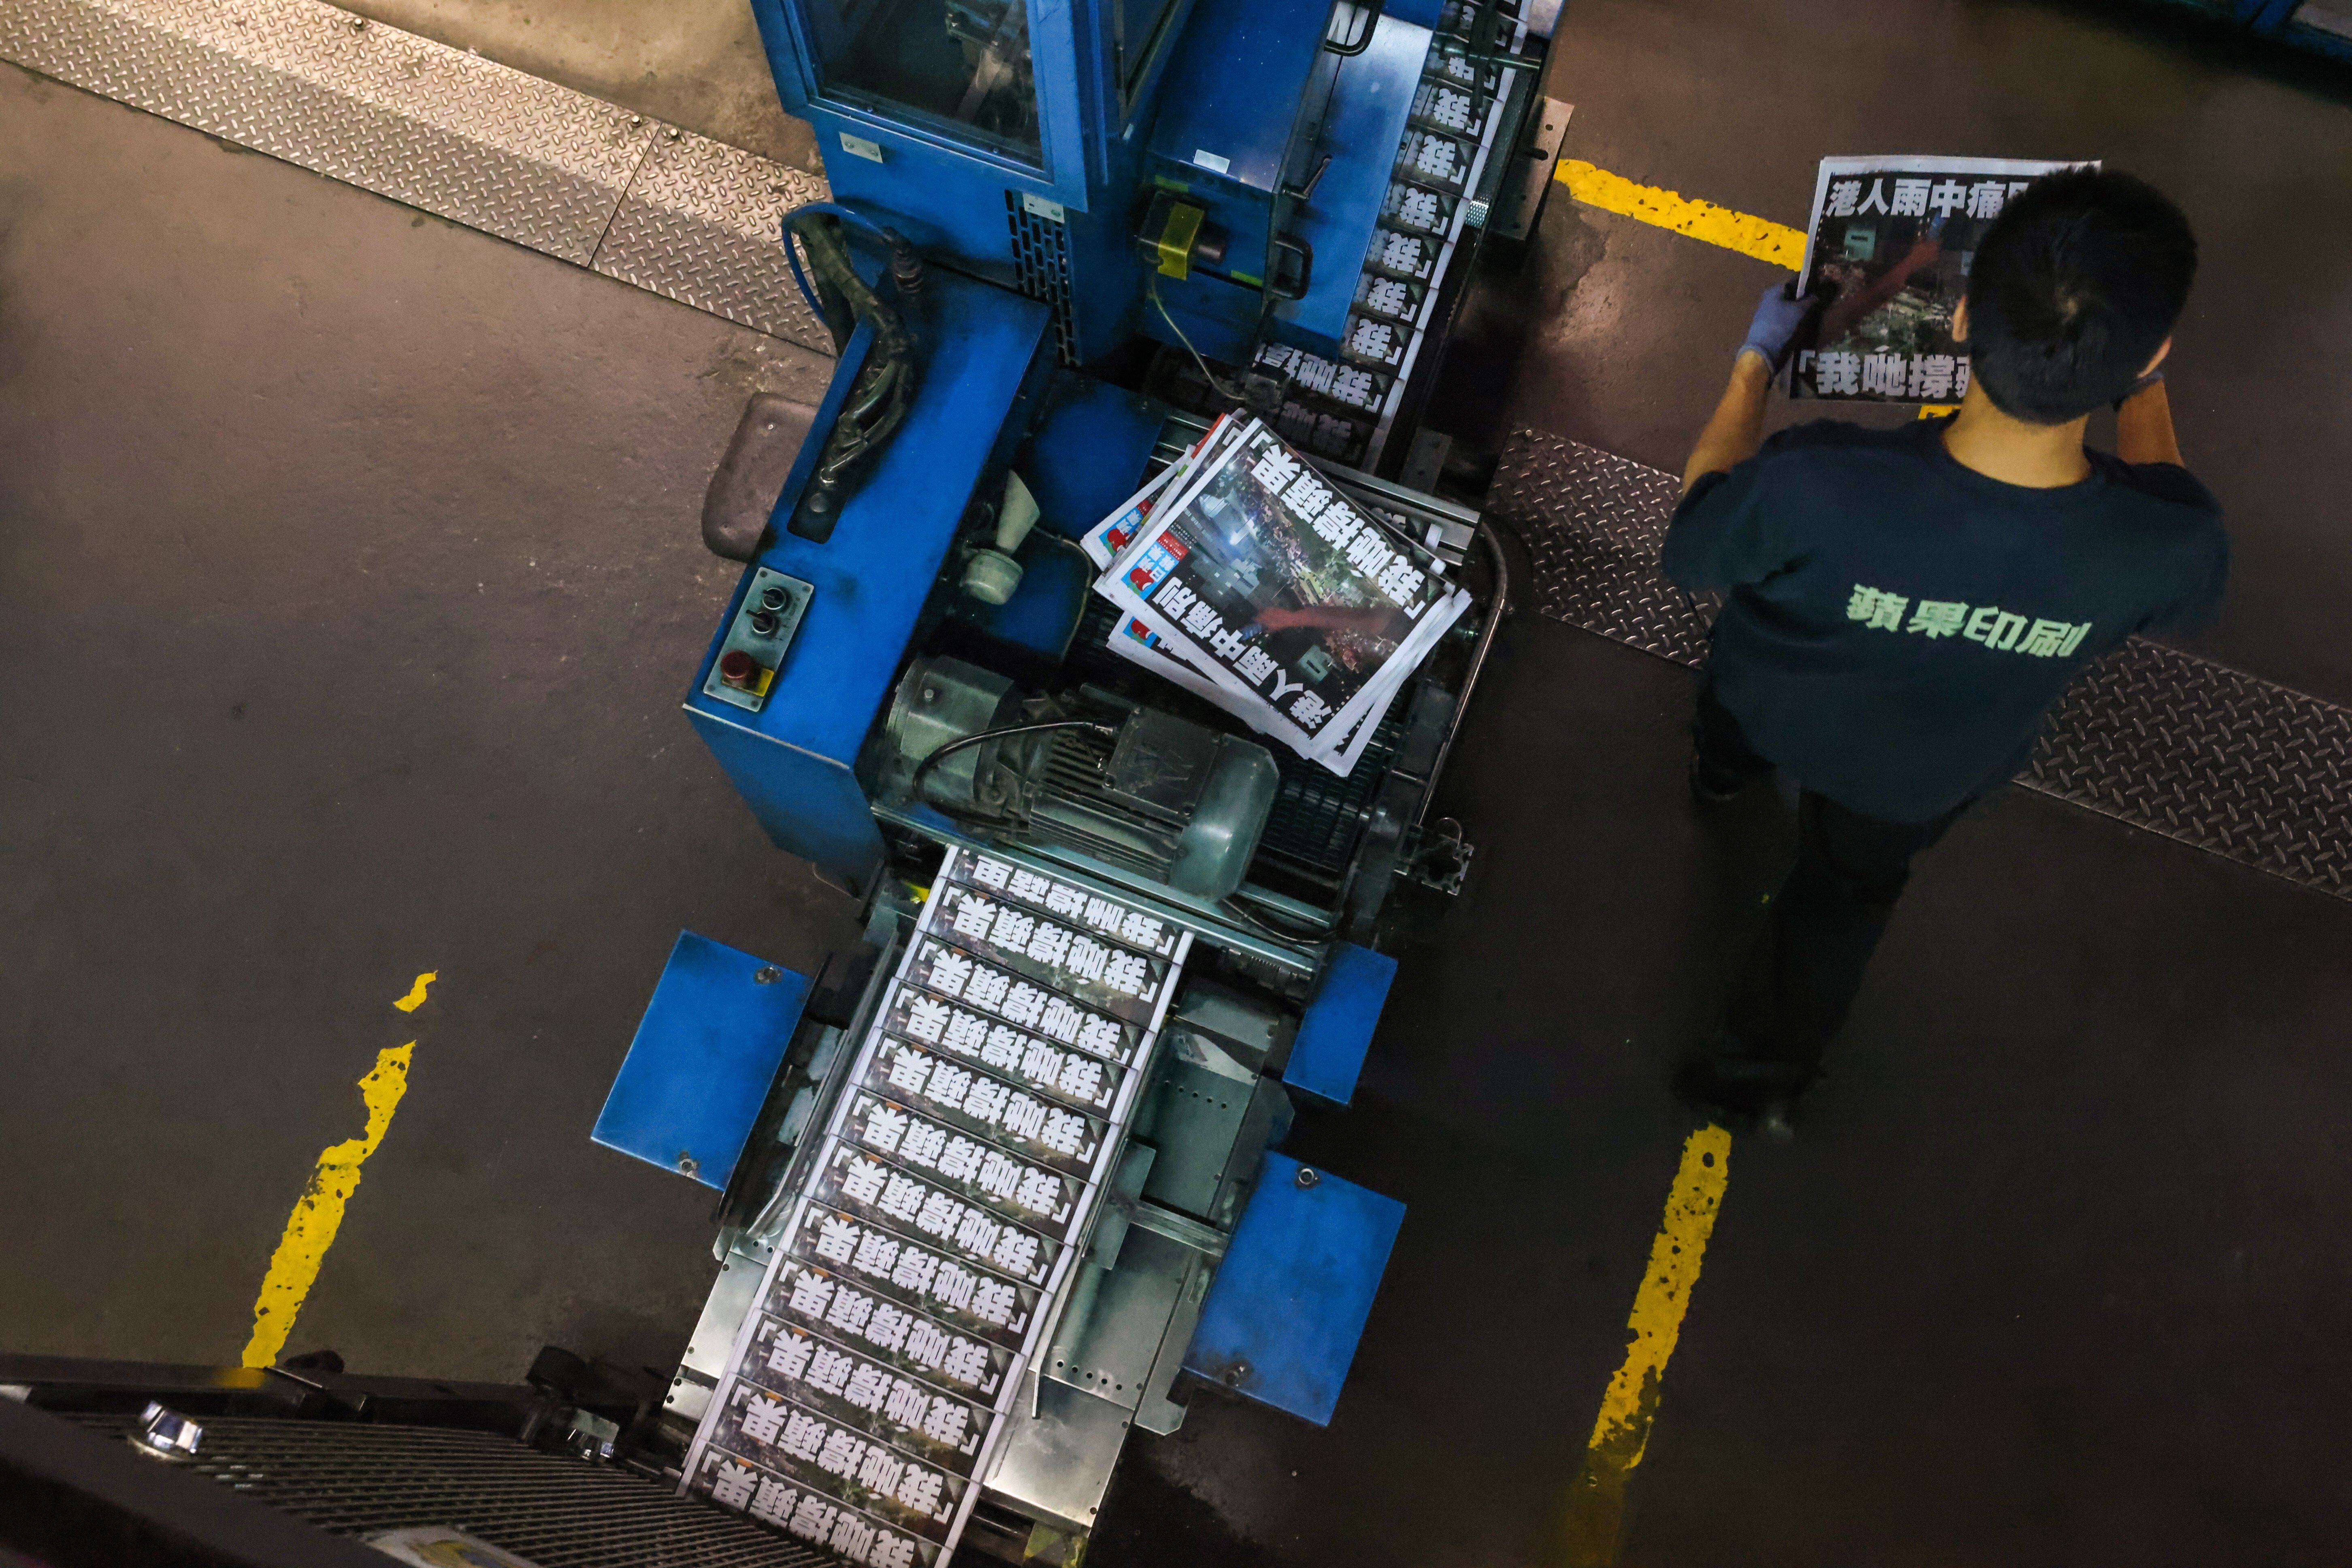 The government has ordered the ceasing of print operations at Apple Daily’s Tseung Kwan O headquarters. Photo: Dickson Lee